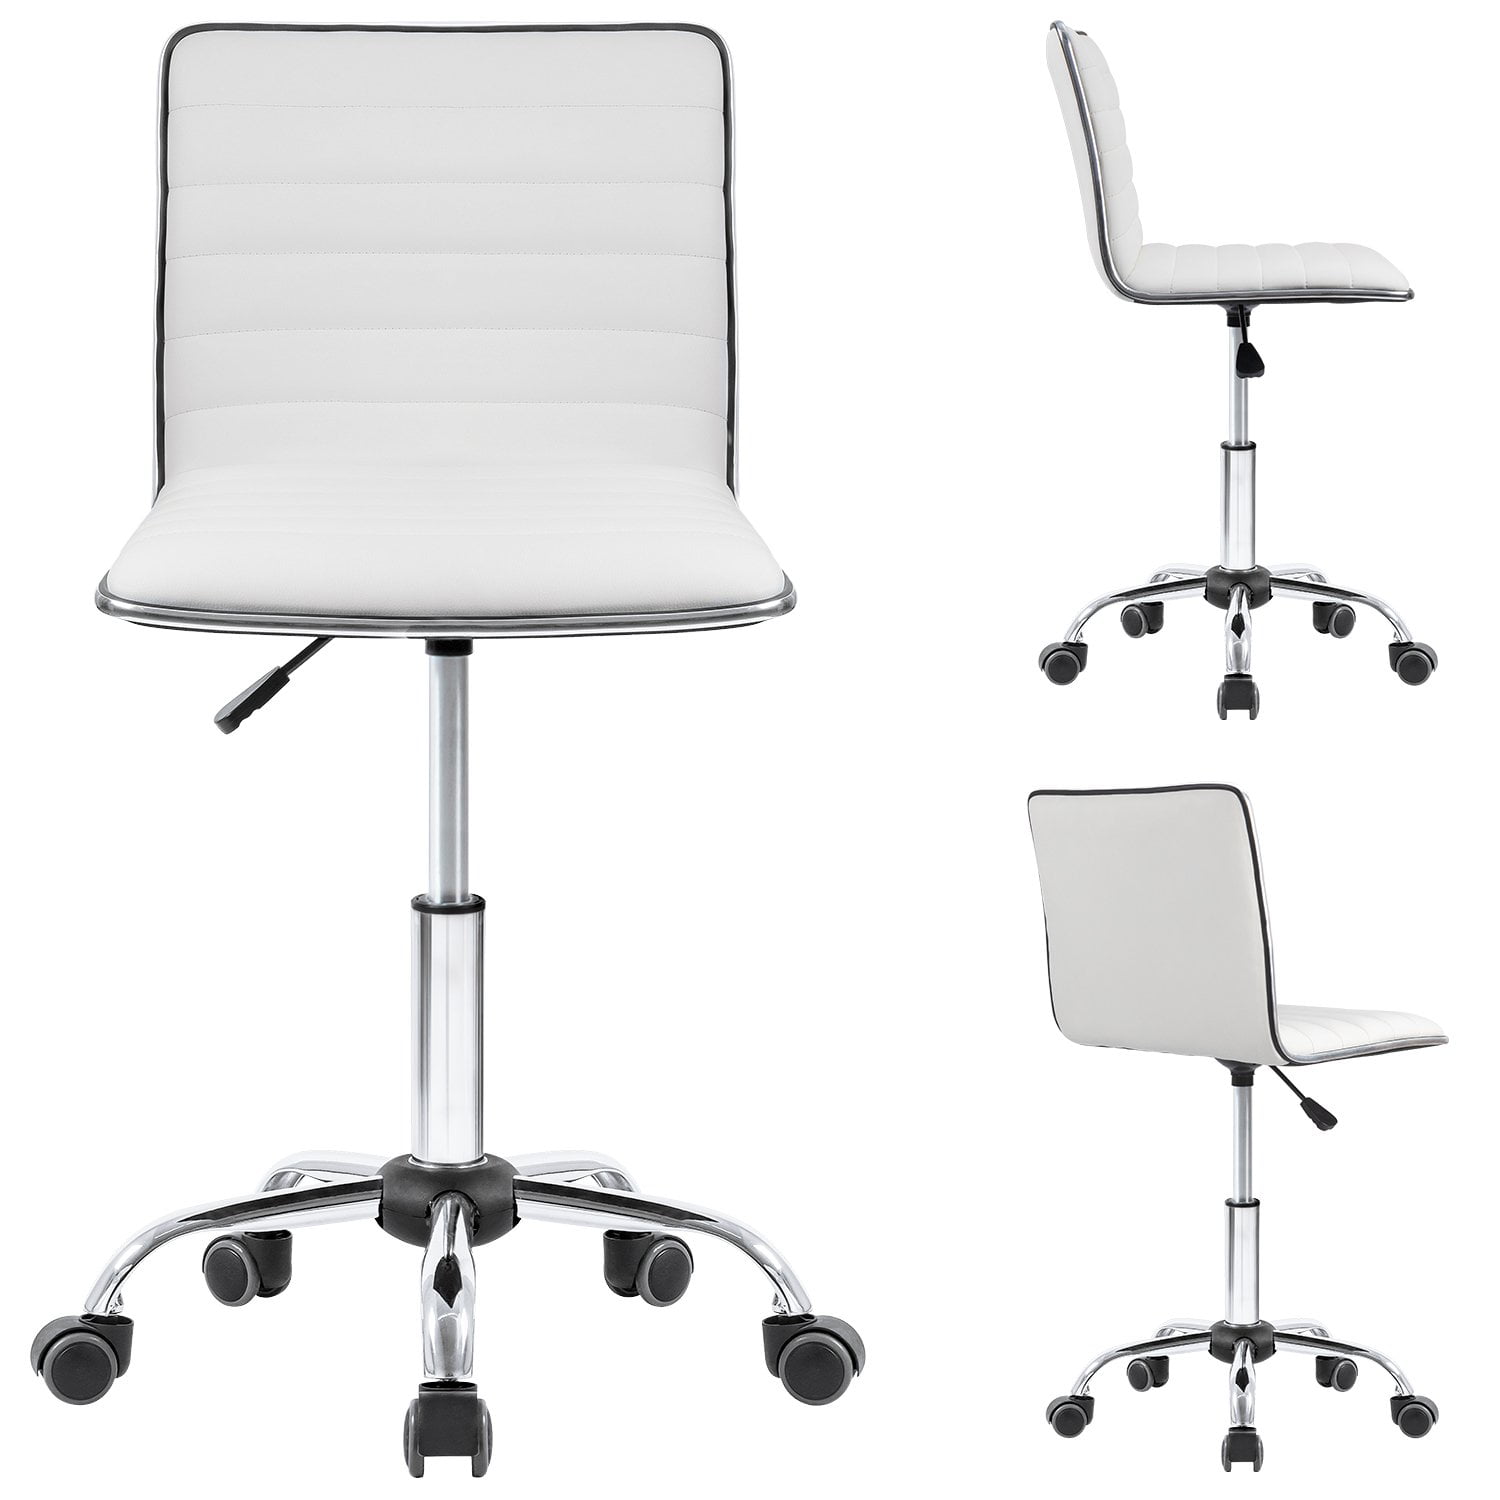 Details about   Armless Home Office Chair Mid-Back Task Chair Adjustable Swivel Desk Chair 